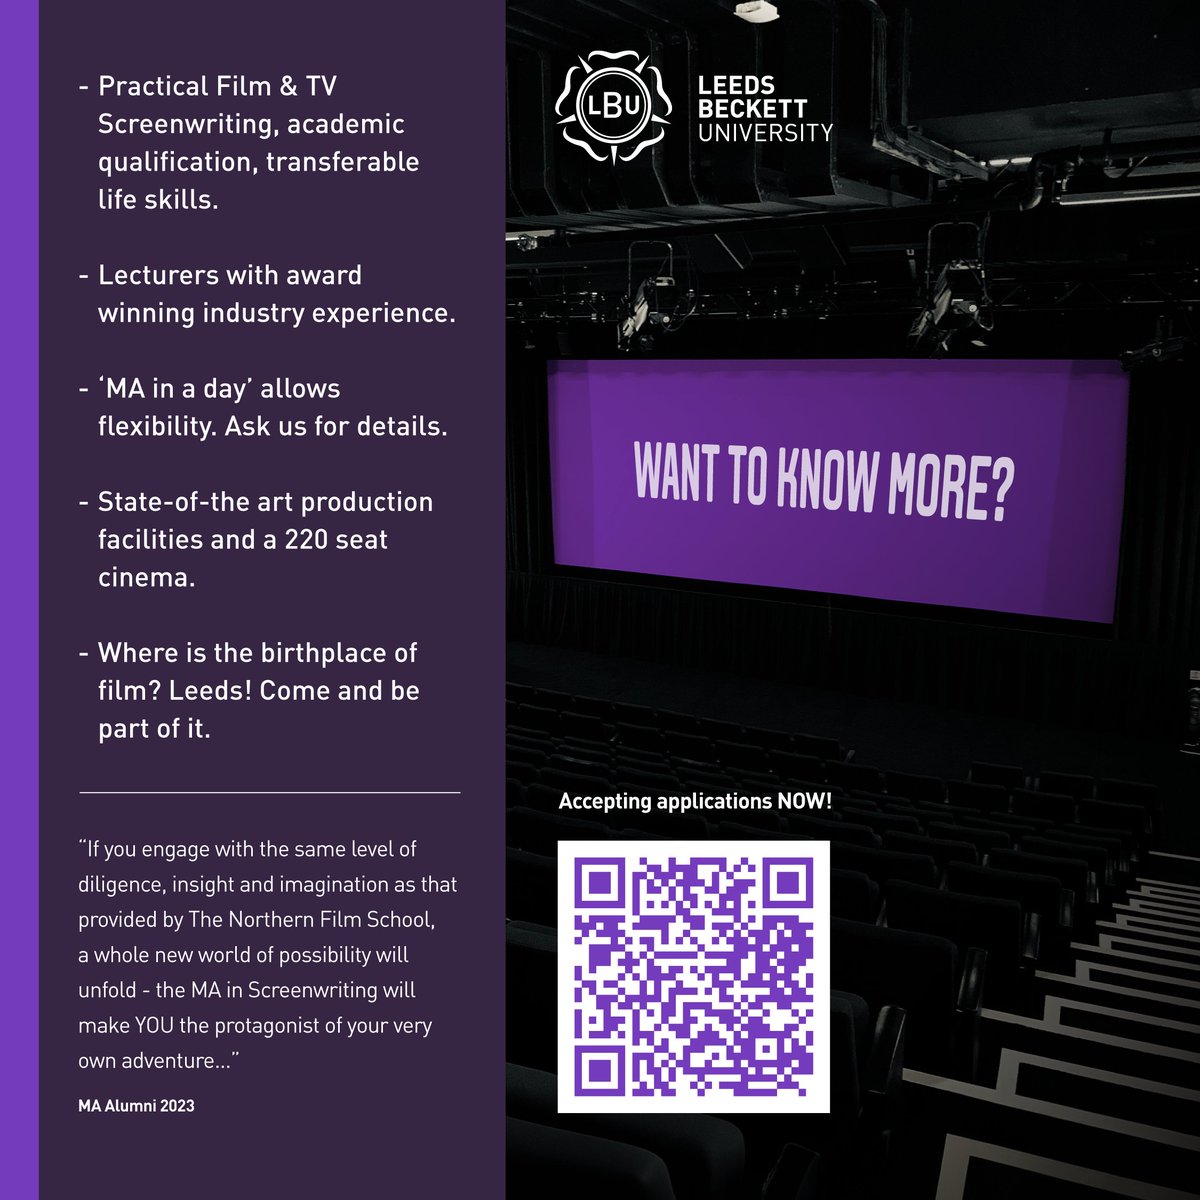 Accepting applications for 24/25. Intensive but flexible course. Taught by industry pros. We do what we say on the tin - screenwriting - but the life skills learnt are transferable. Scan QR code for more details. @leedsbeckett @NFSFilmTV #film #screenwriting #Leeds